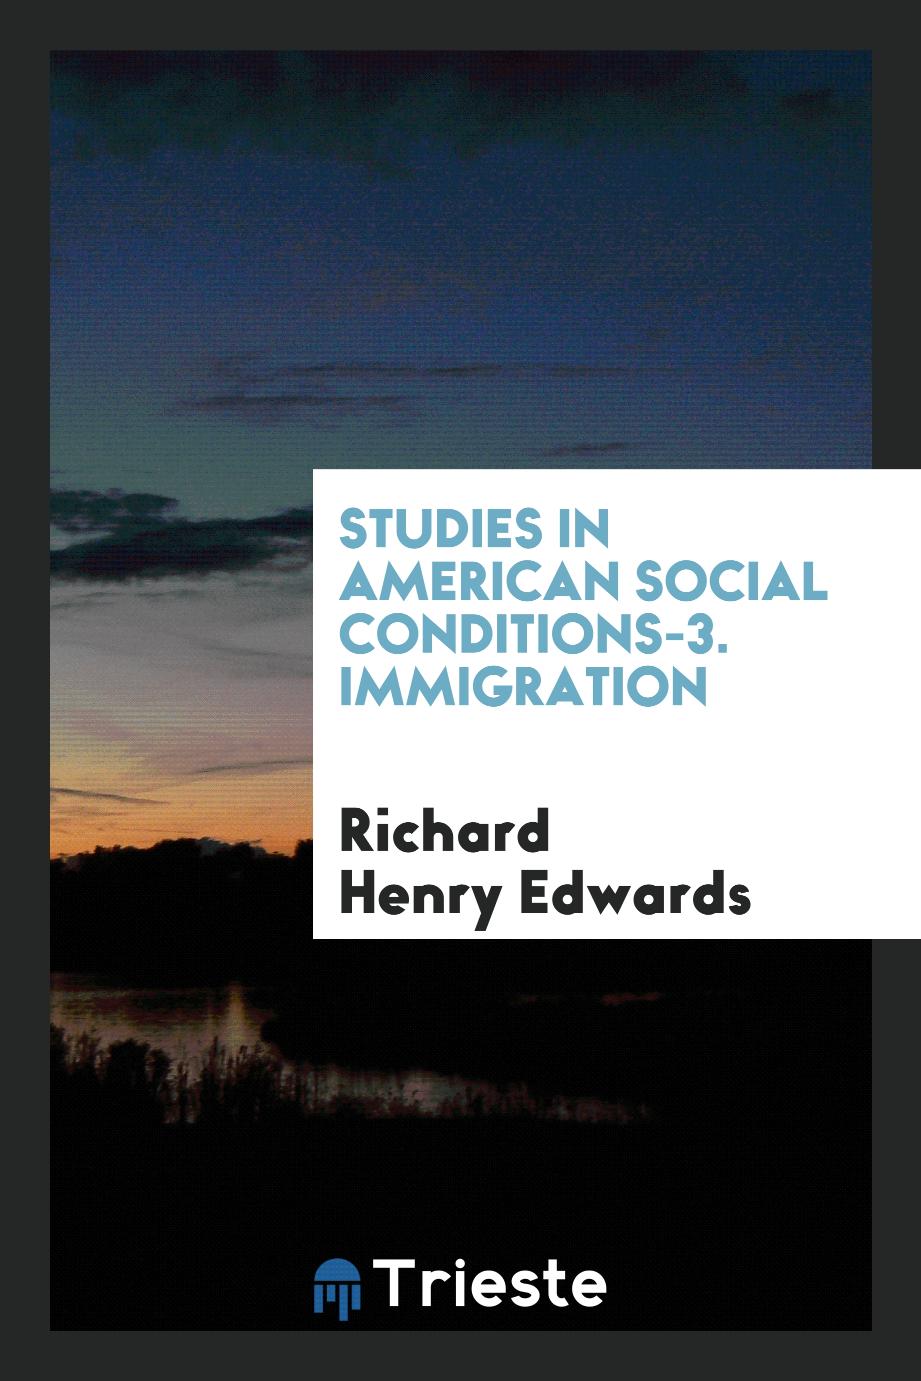 Studies in American social Conditions-3. Immigration